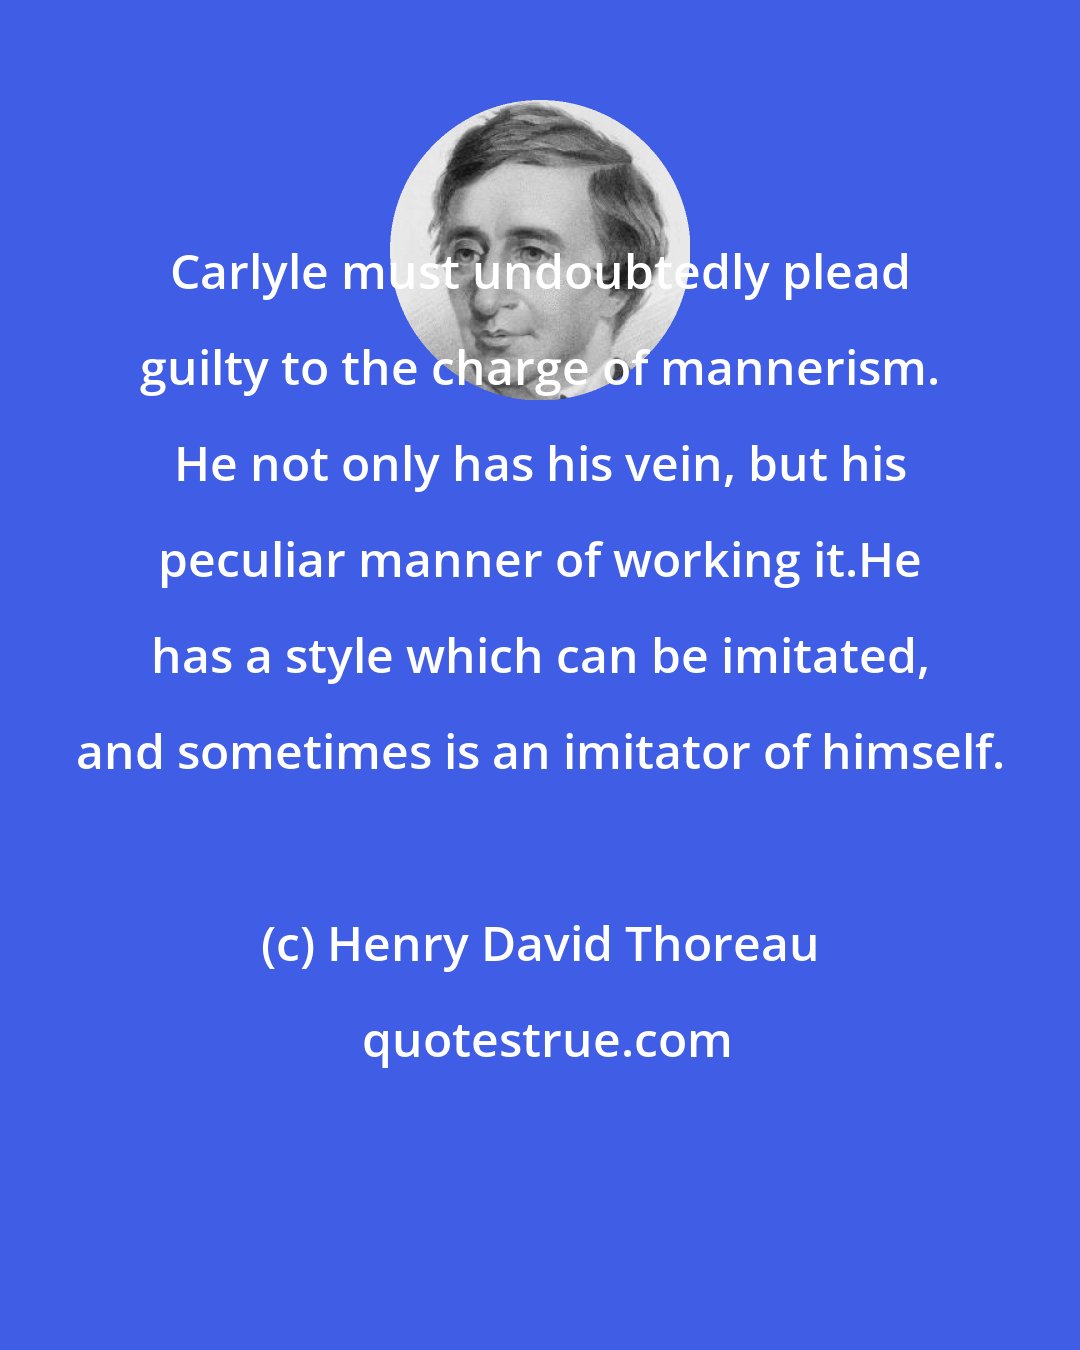 Henry David Thoreau: Carlyle must undoubtedly plead guilty to the charge of mannerism. He not only has his vein, but his peculiar manner of working it.He has a style which can be imitated, and sometimes is an imitator of himself.